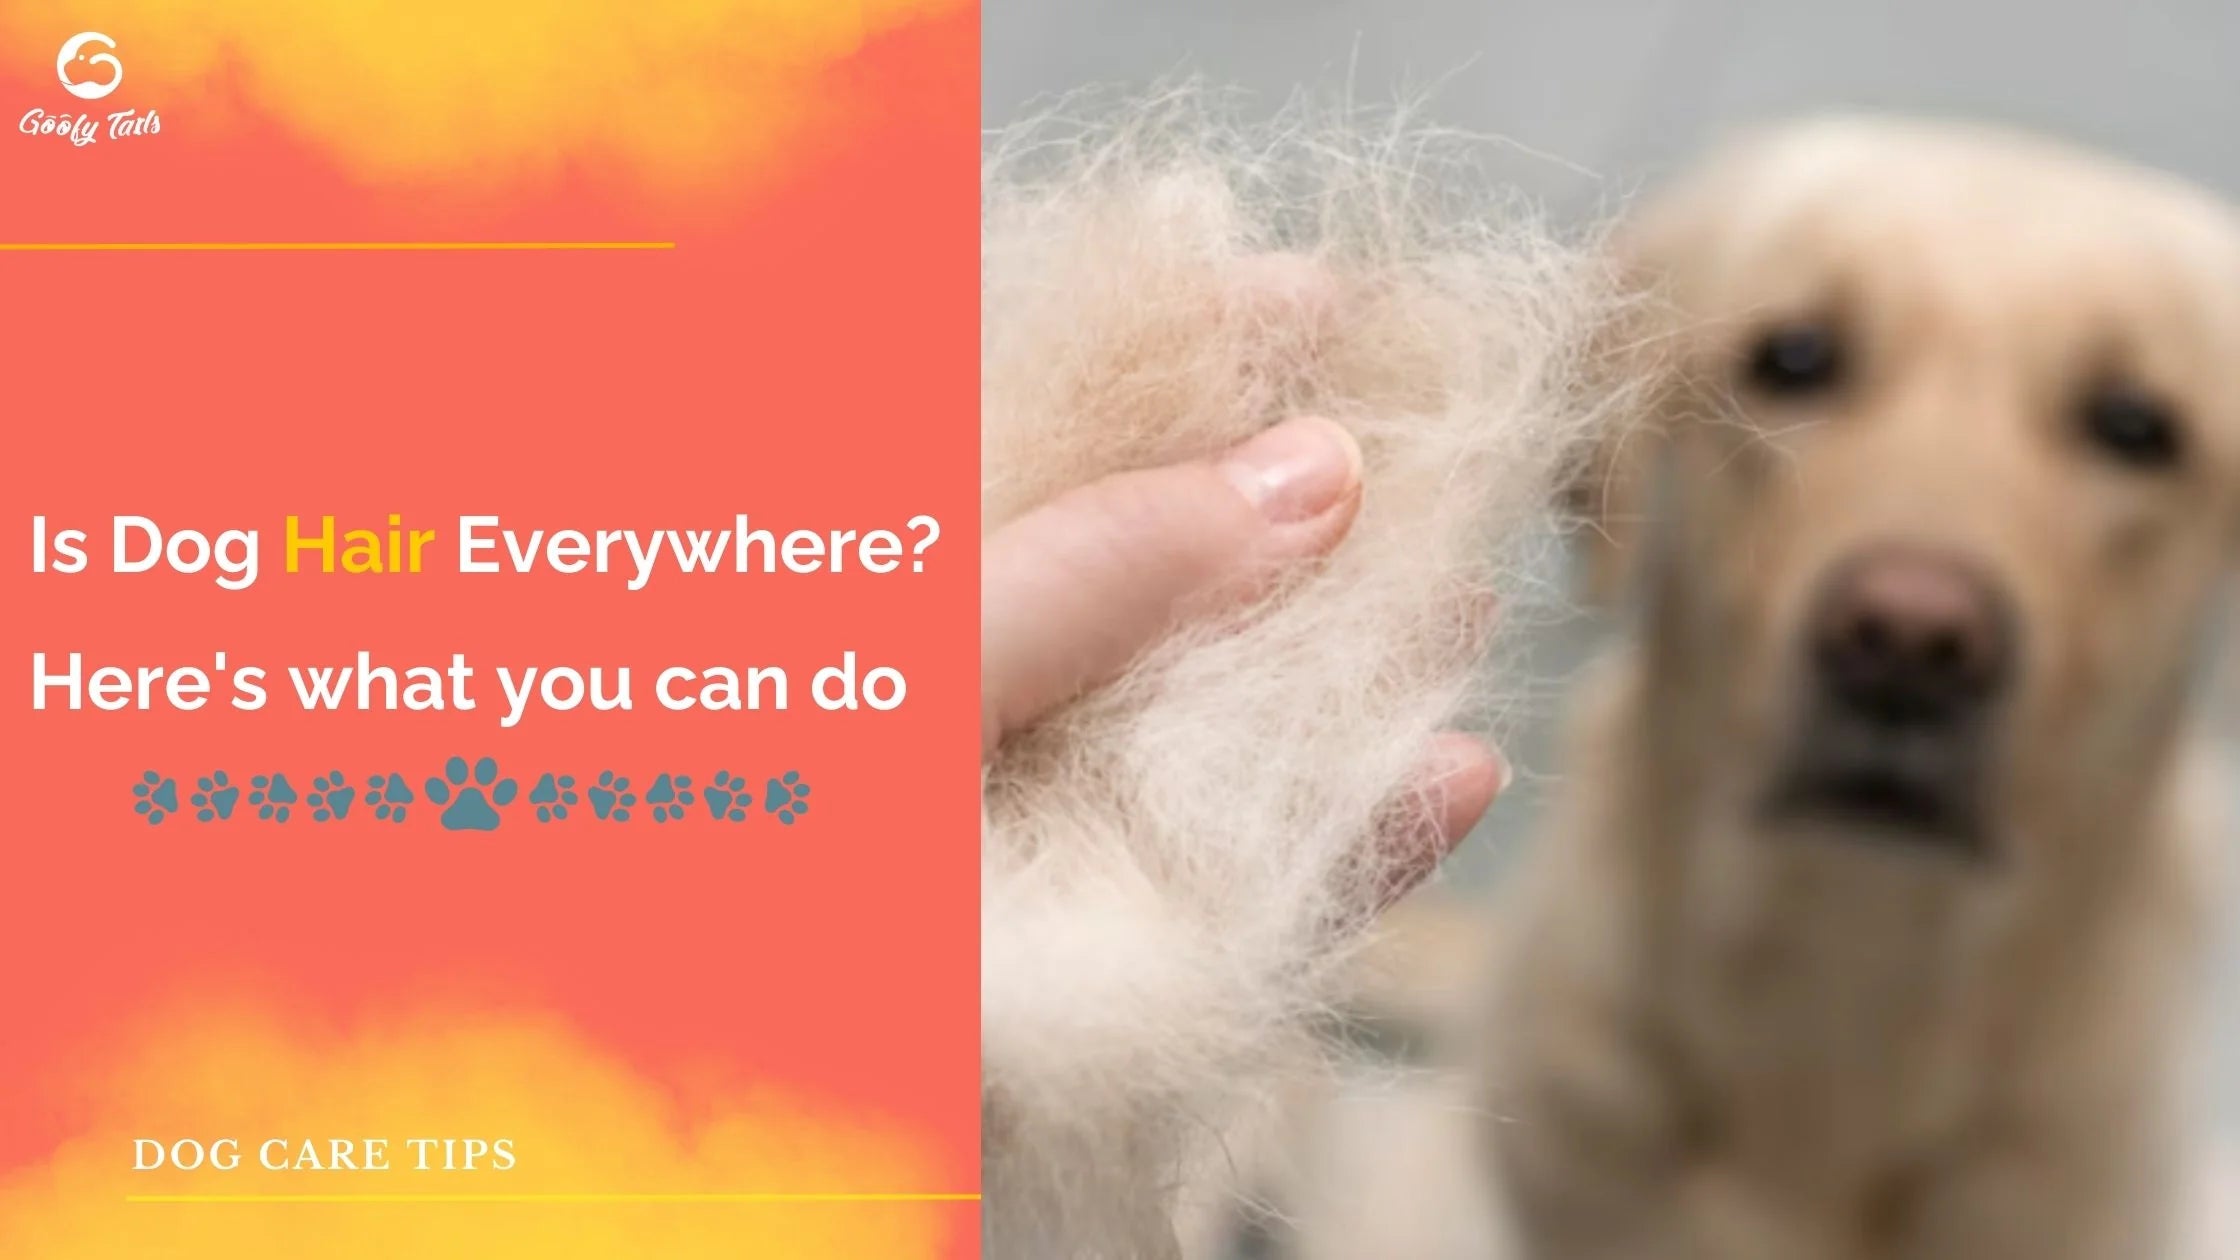 Is dog hair everywhere?  Here's what you can do - blog from goofytails.com